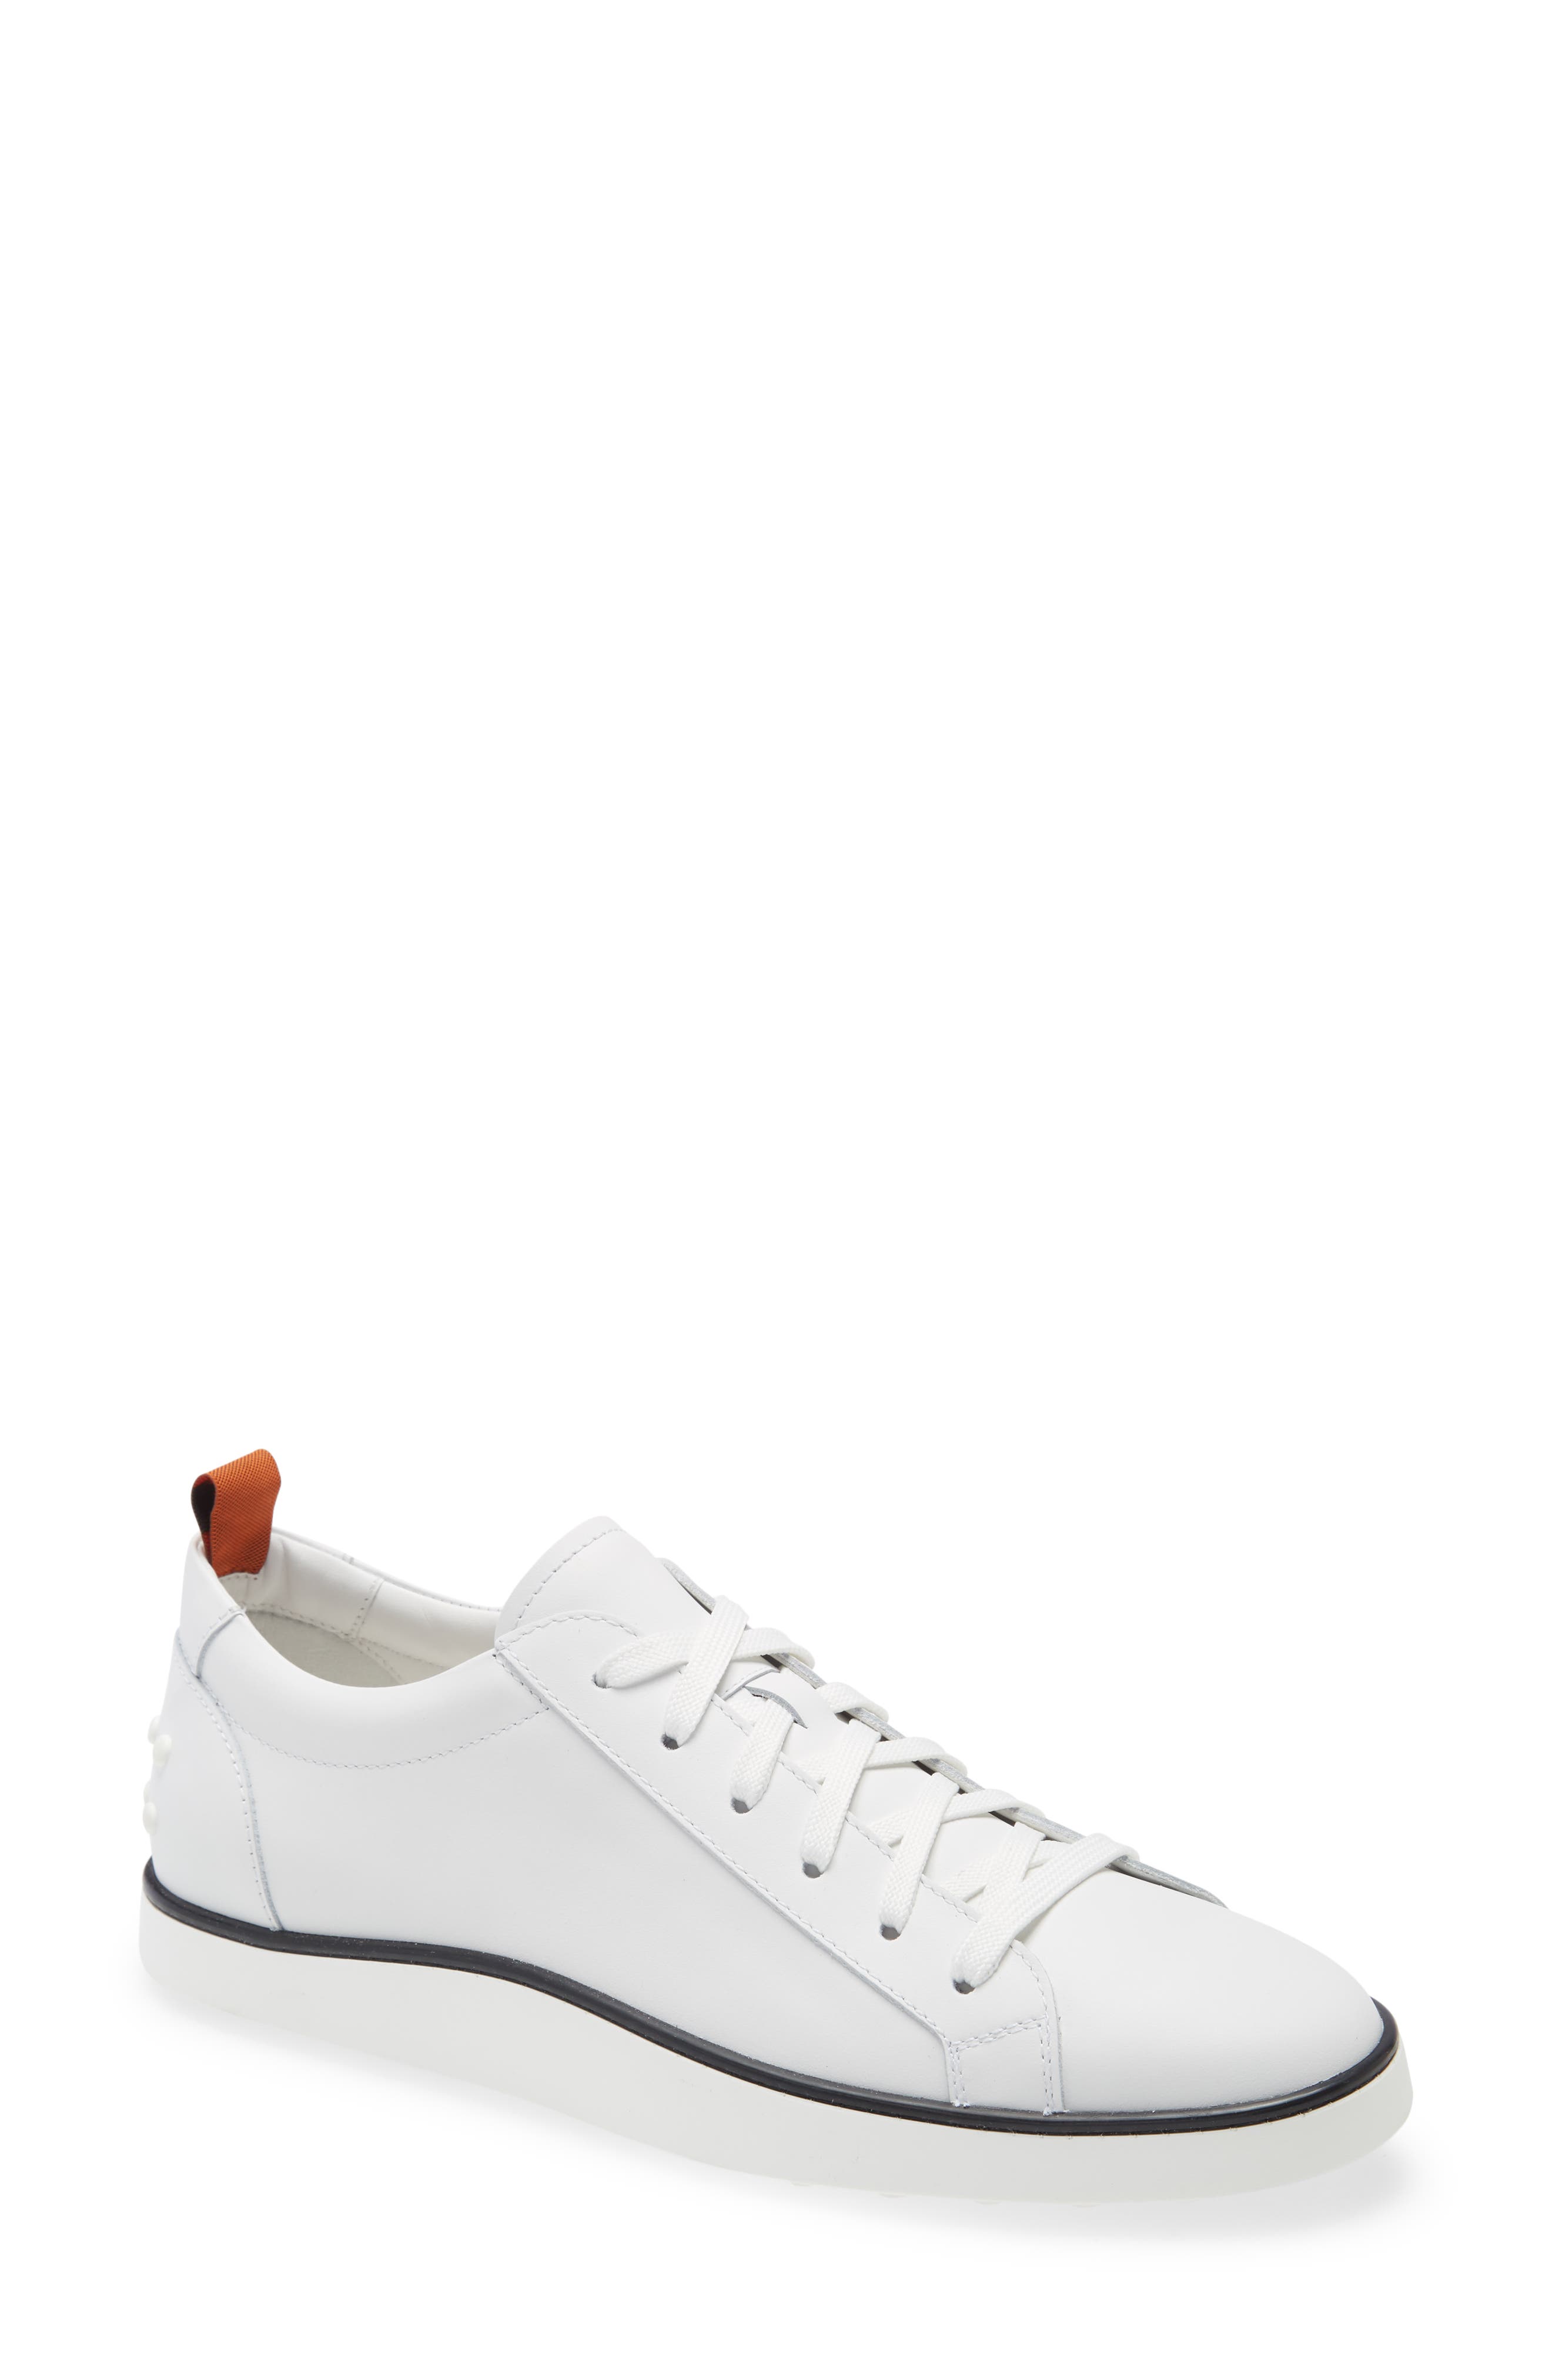 tods tennis shoes